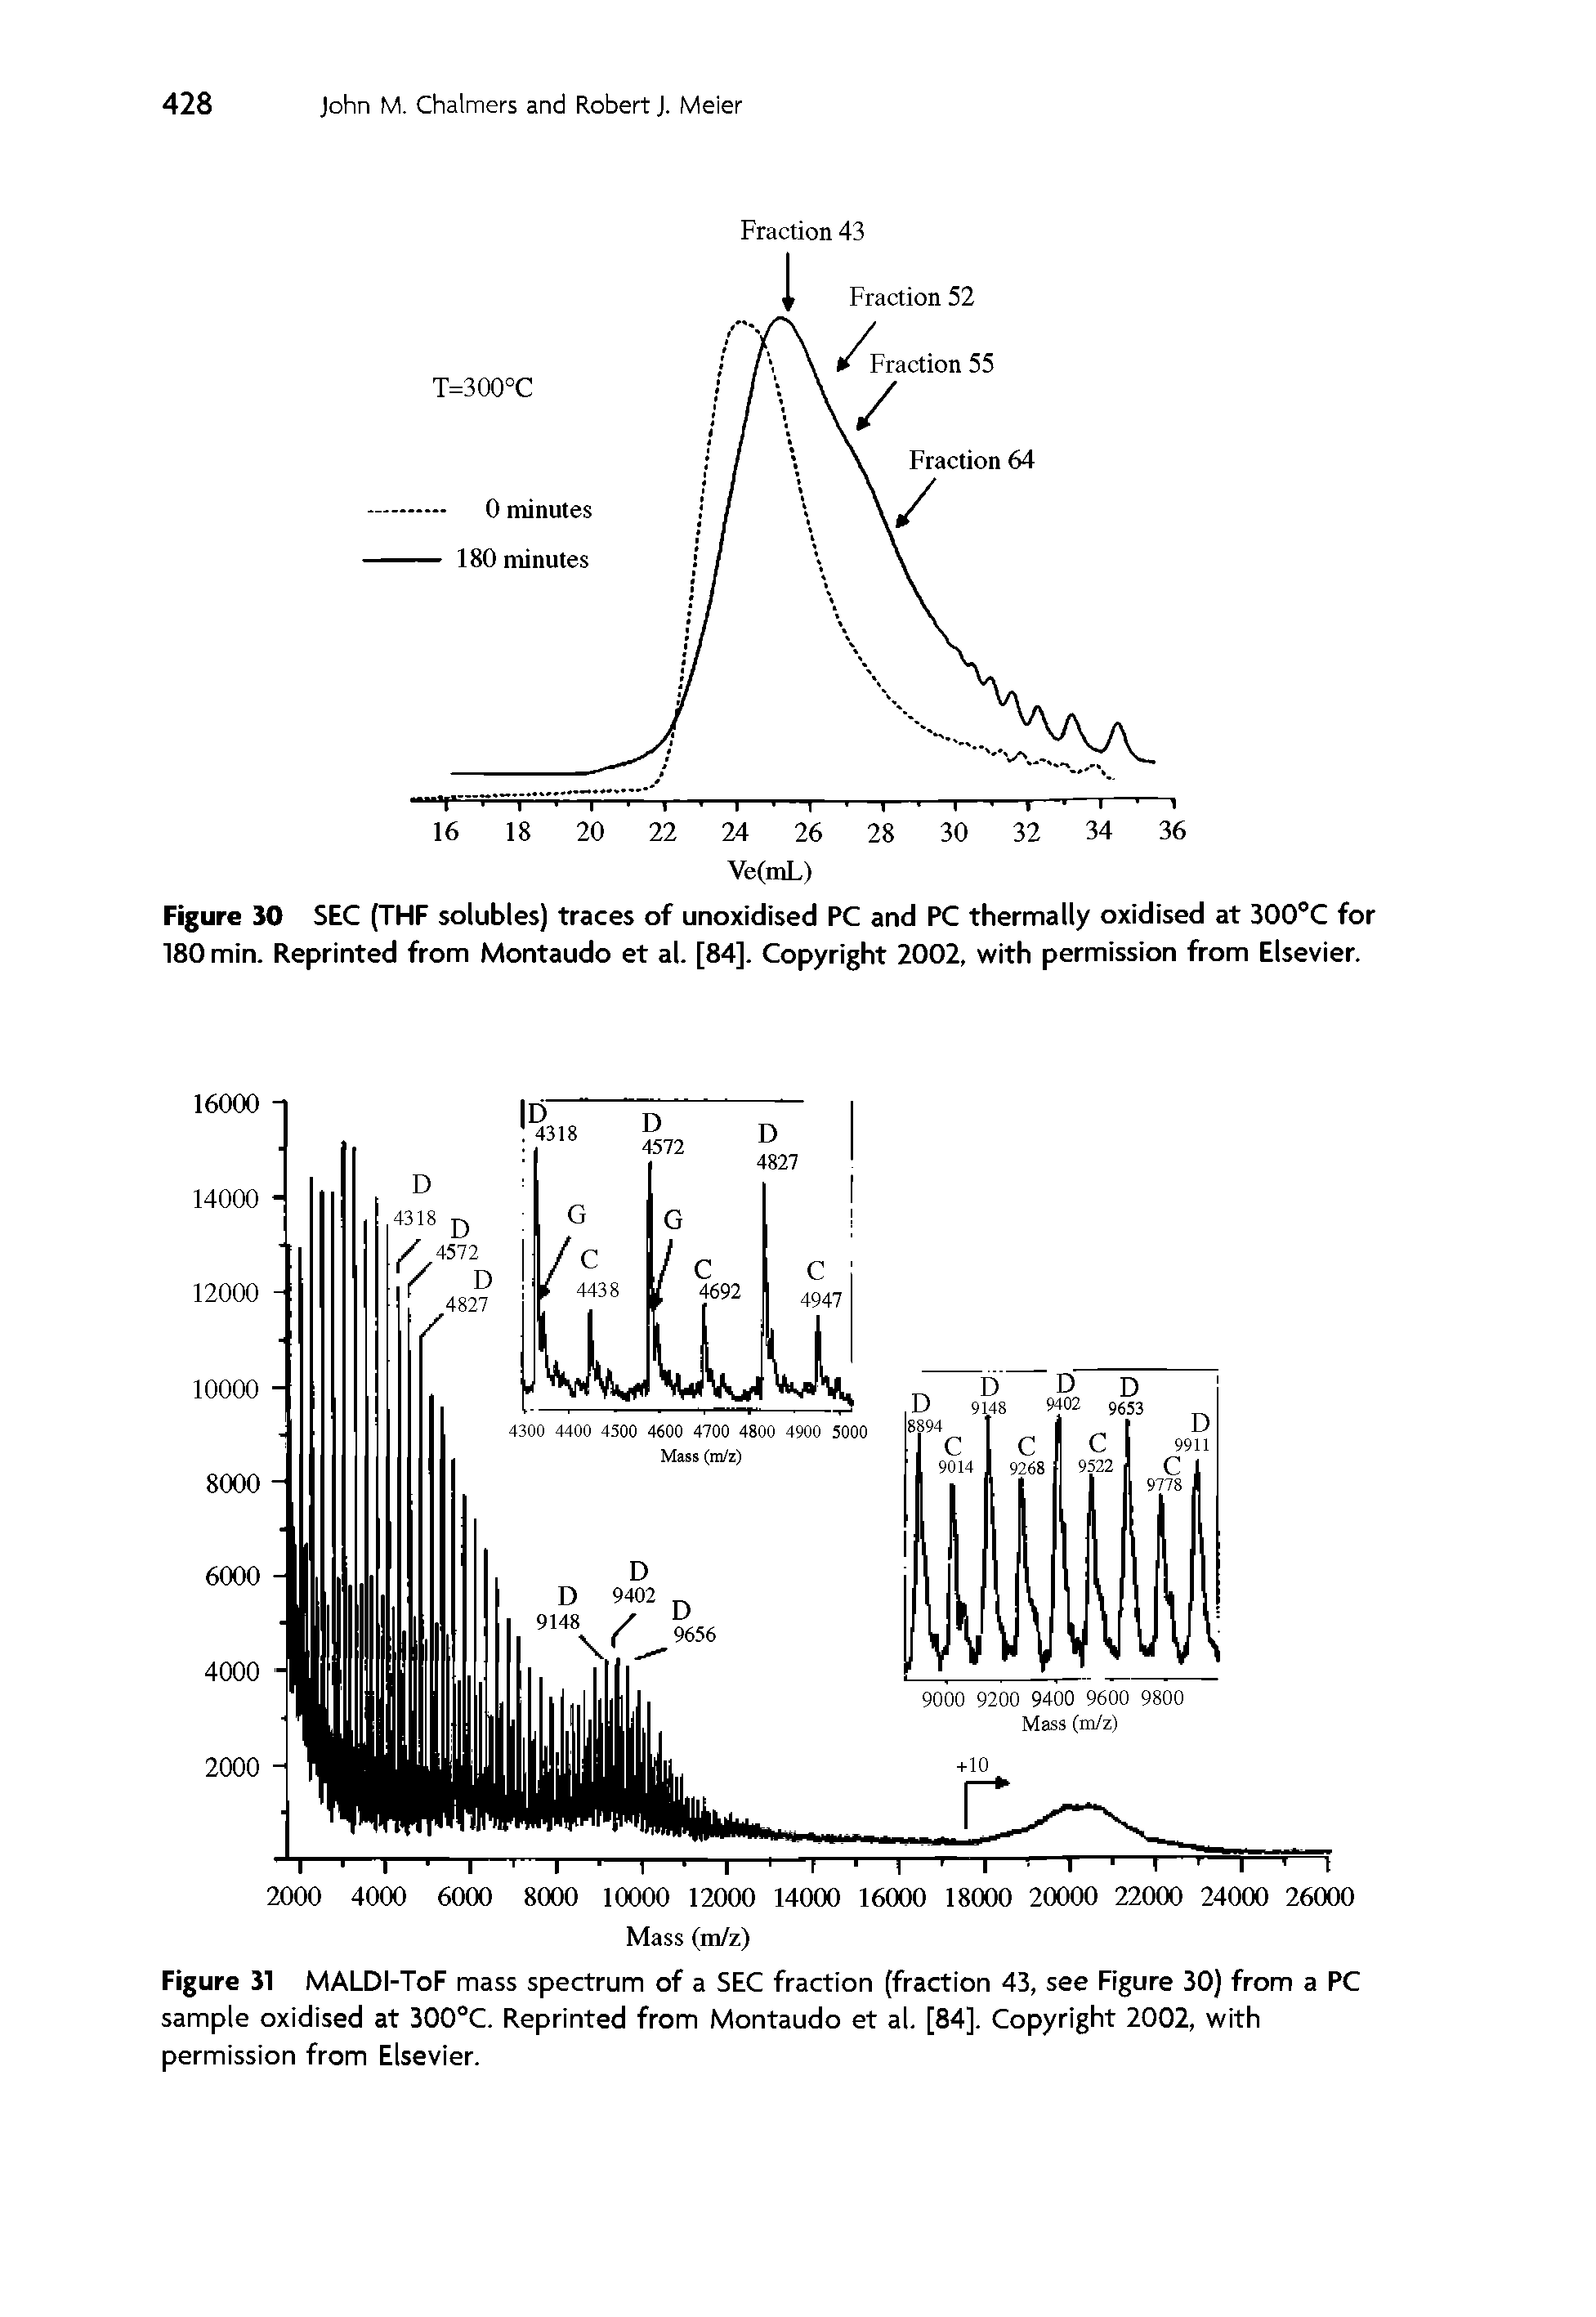 Figure 31 MALDI-ToF mass spectrum of a SEC fraction (fraction 43, see Figure 30) from a PC sample oxidised at 300°C. Reprinted from Montaudo et al. [84]. Copyright 2002, with permission from Elsevier.